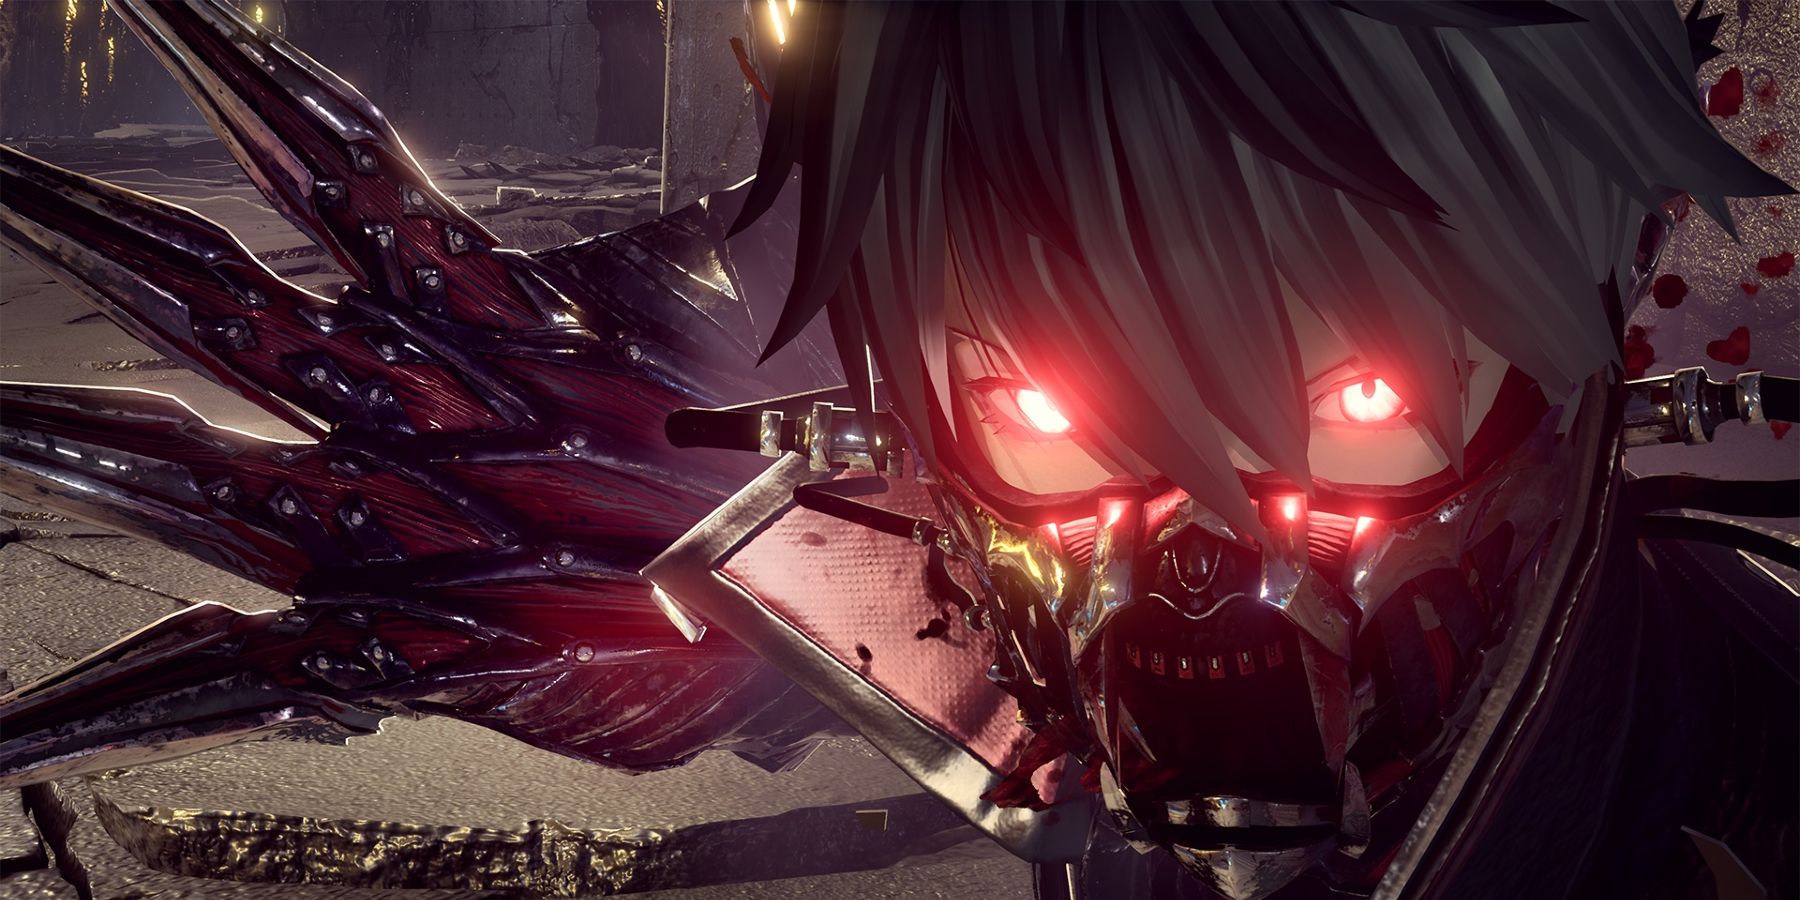 Code Vein PC Version Will Make Its Xbox Game Pass Debut in February